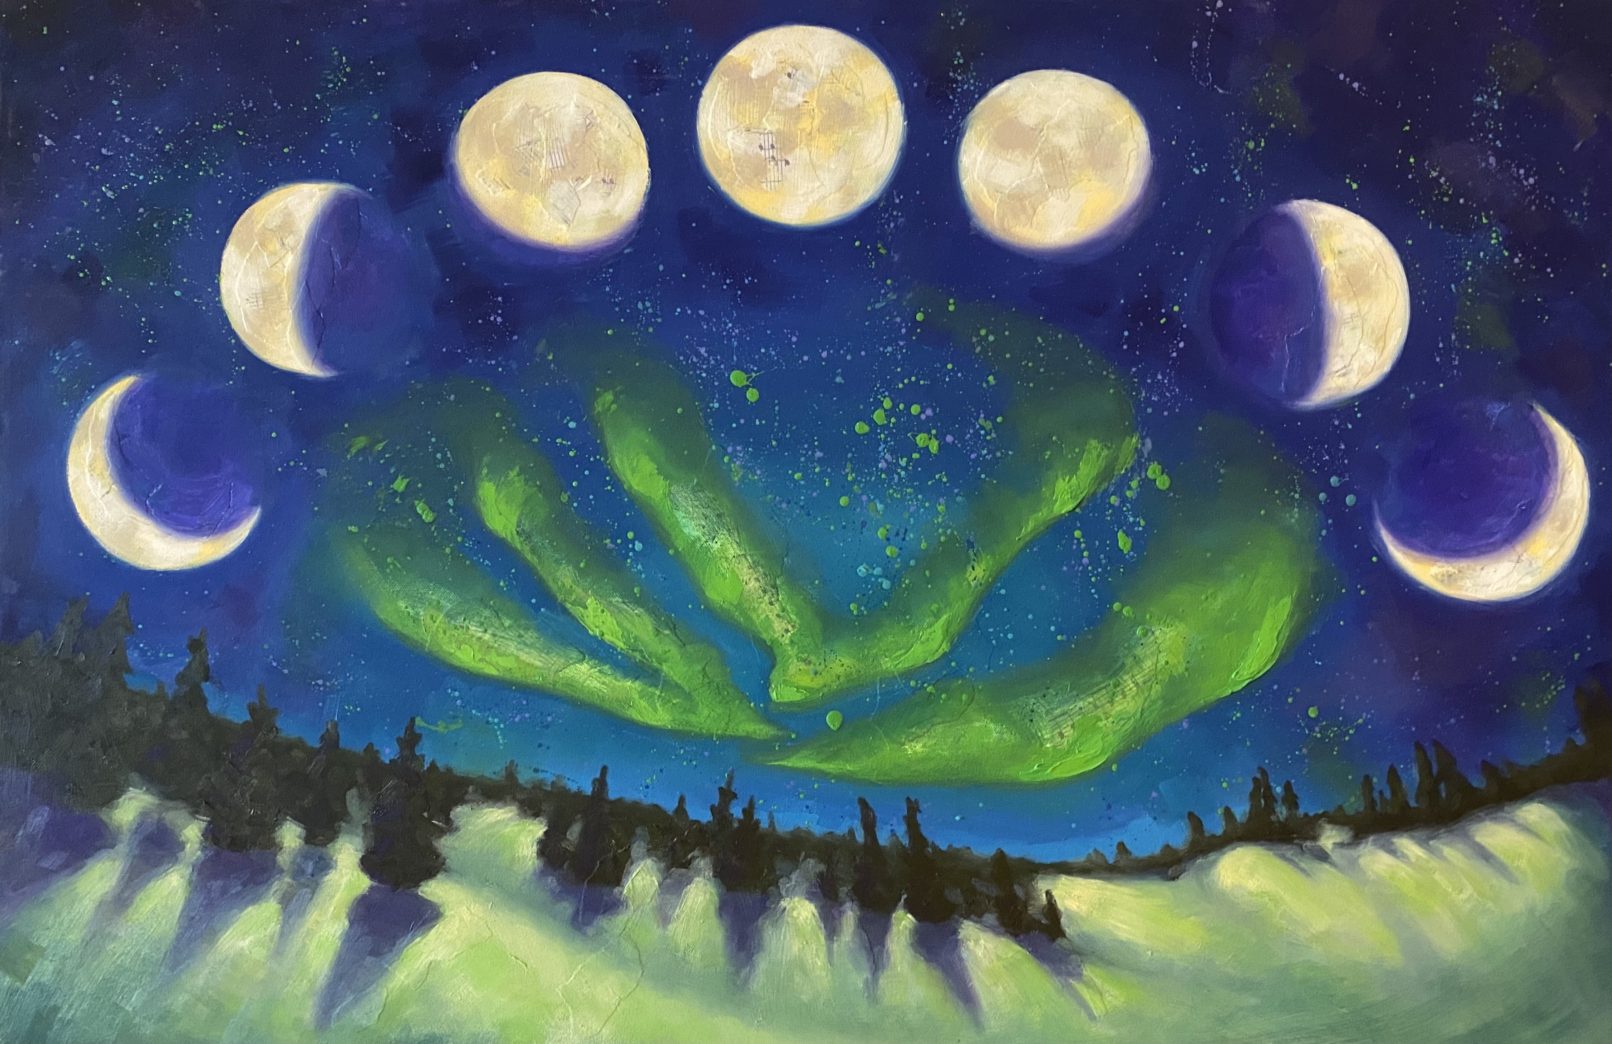 Moon Phase Painting with green northern lights by award-winning artist Rhianna Rose Hixon